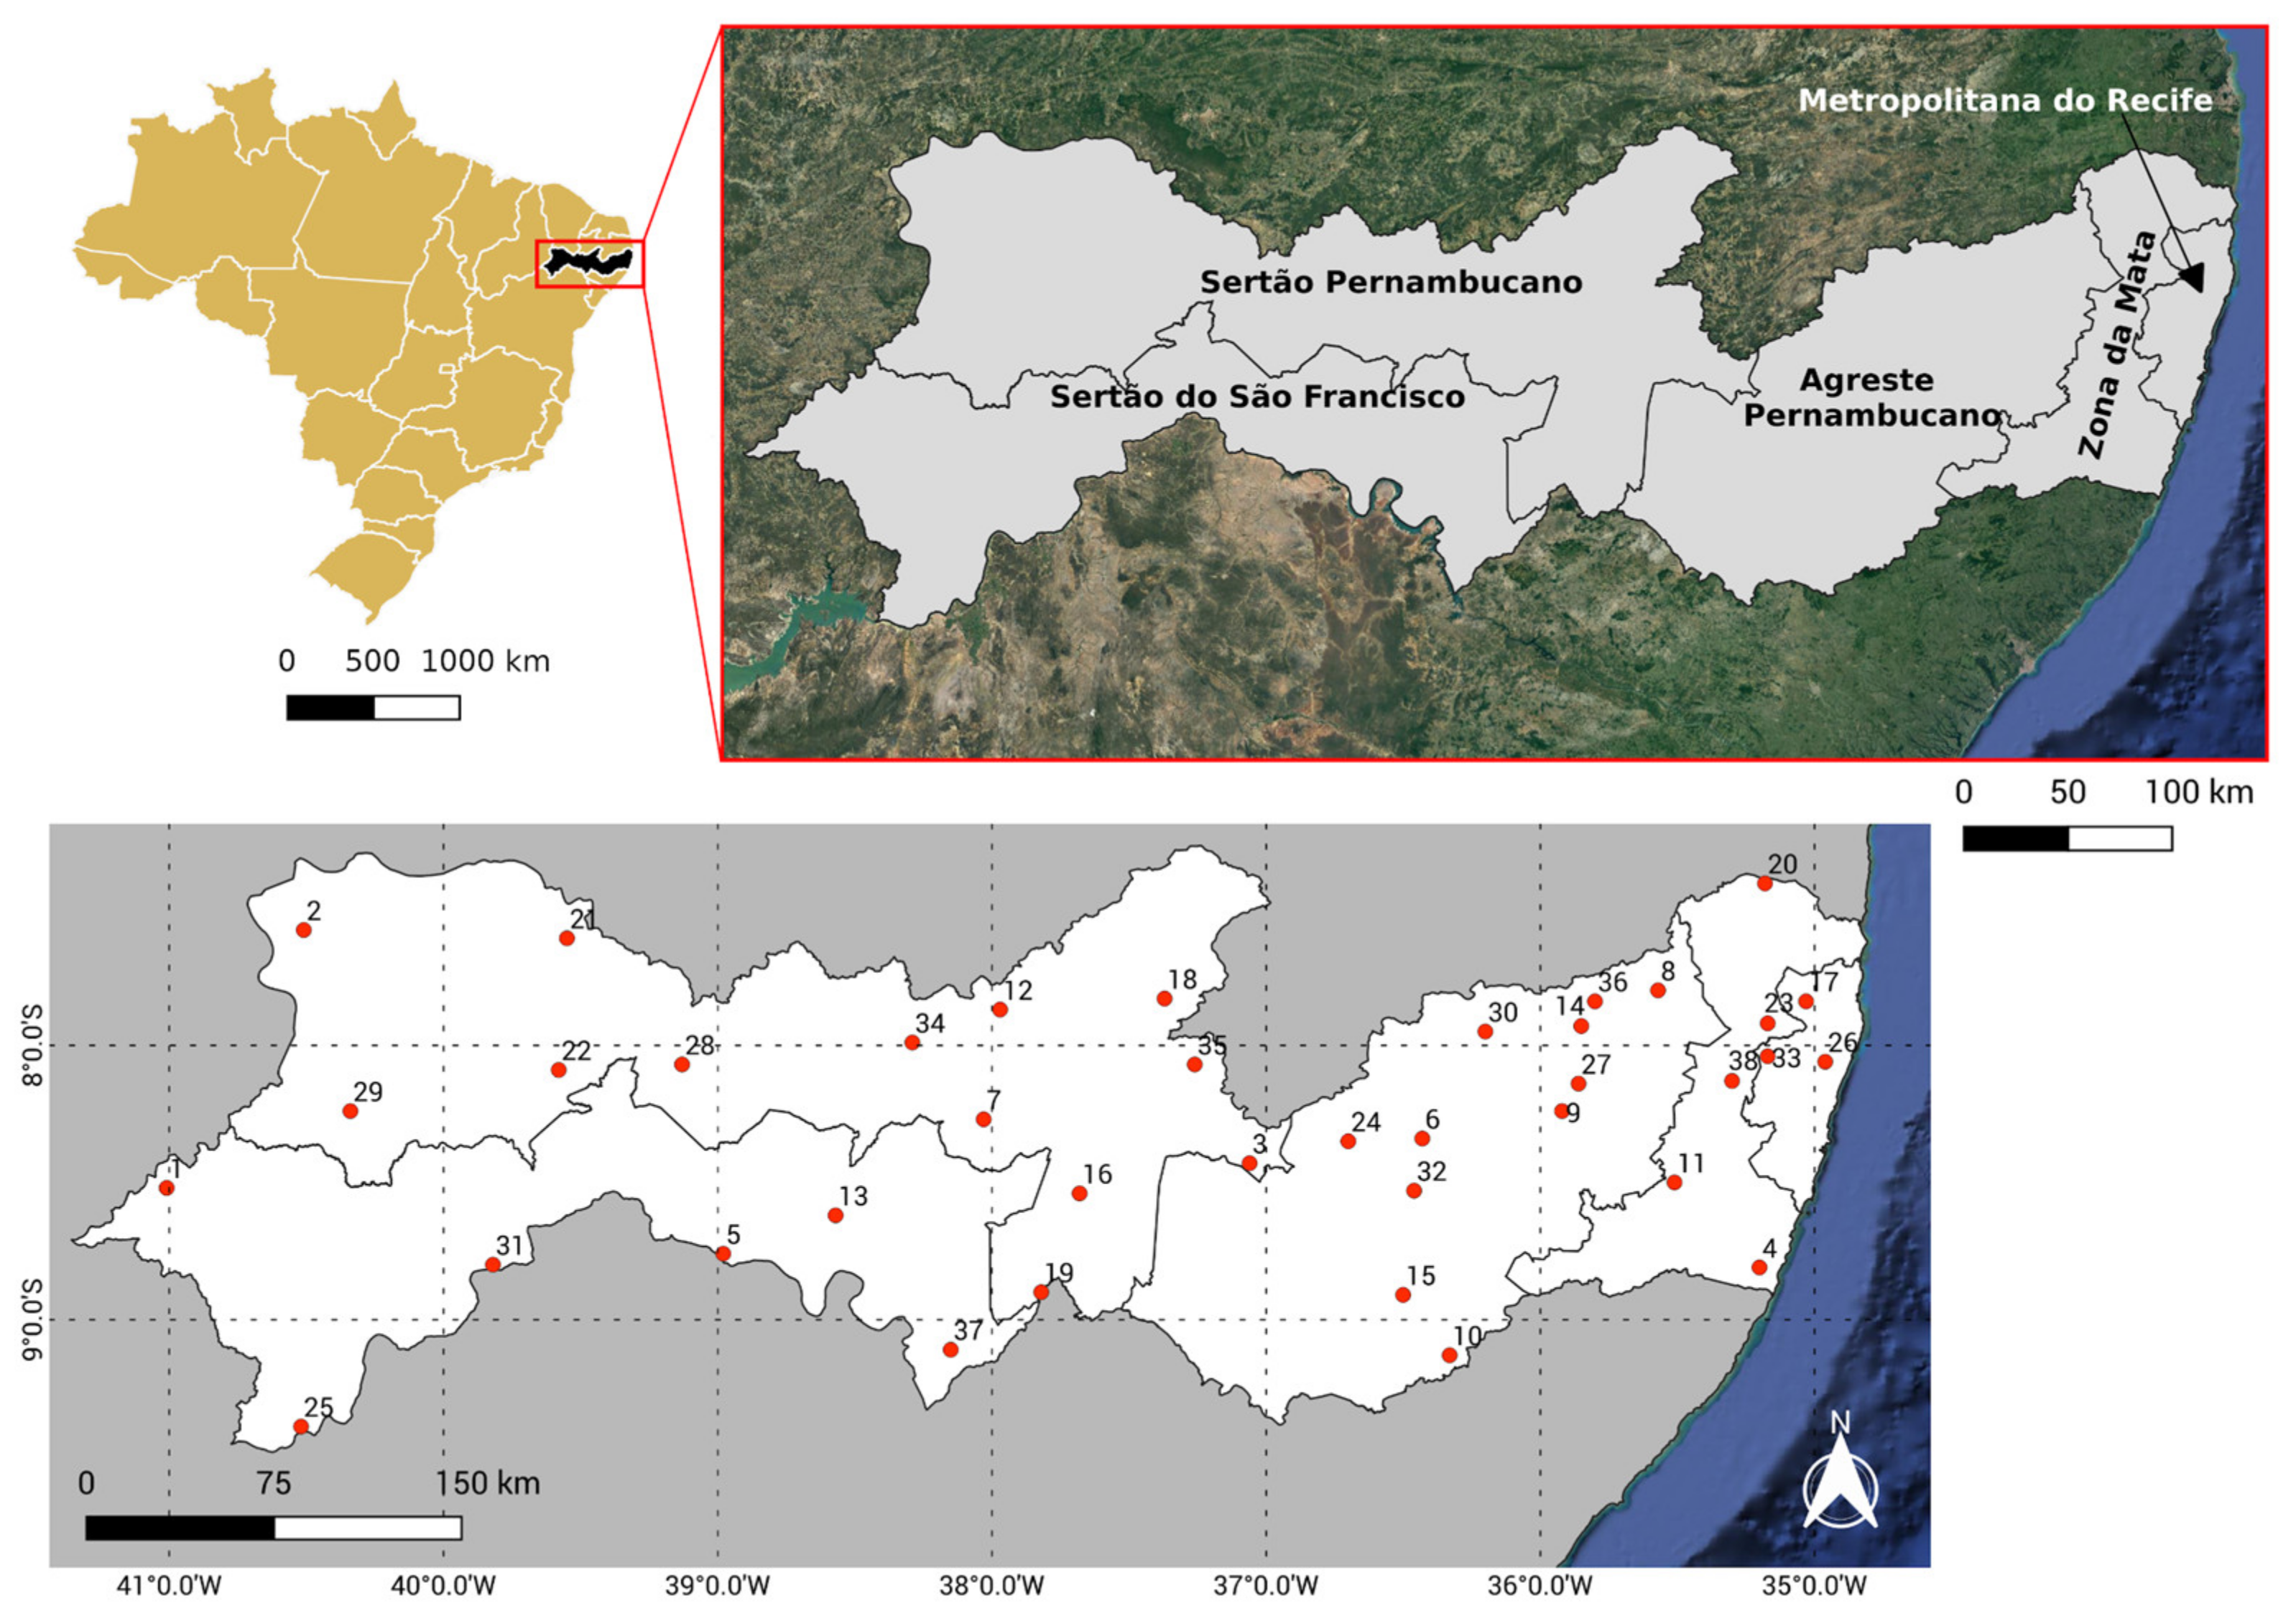 Water | Free Full-Text | Climate Indices-Based Analysis of Rainfall  Spatiotemporal Variability in Pernambuco State, Brazil | HTML